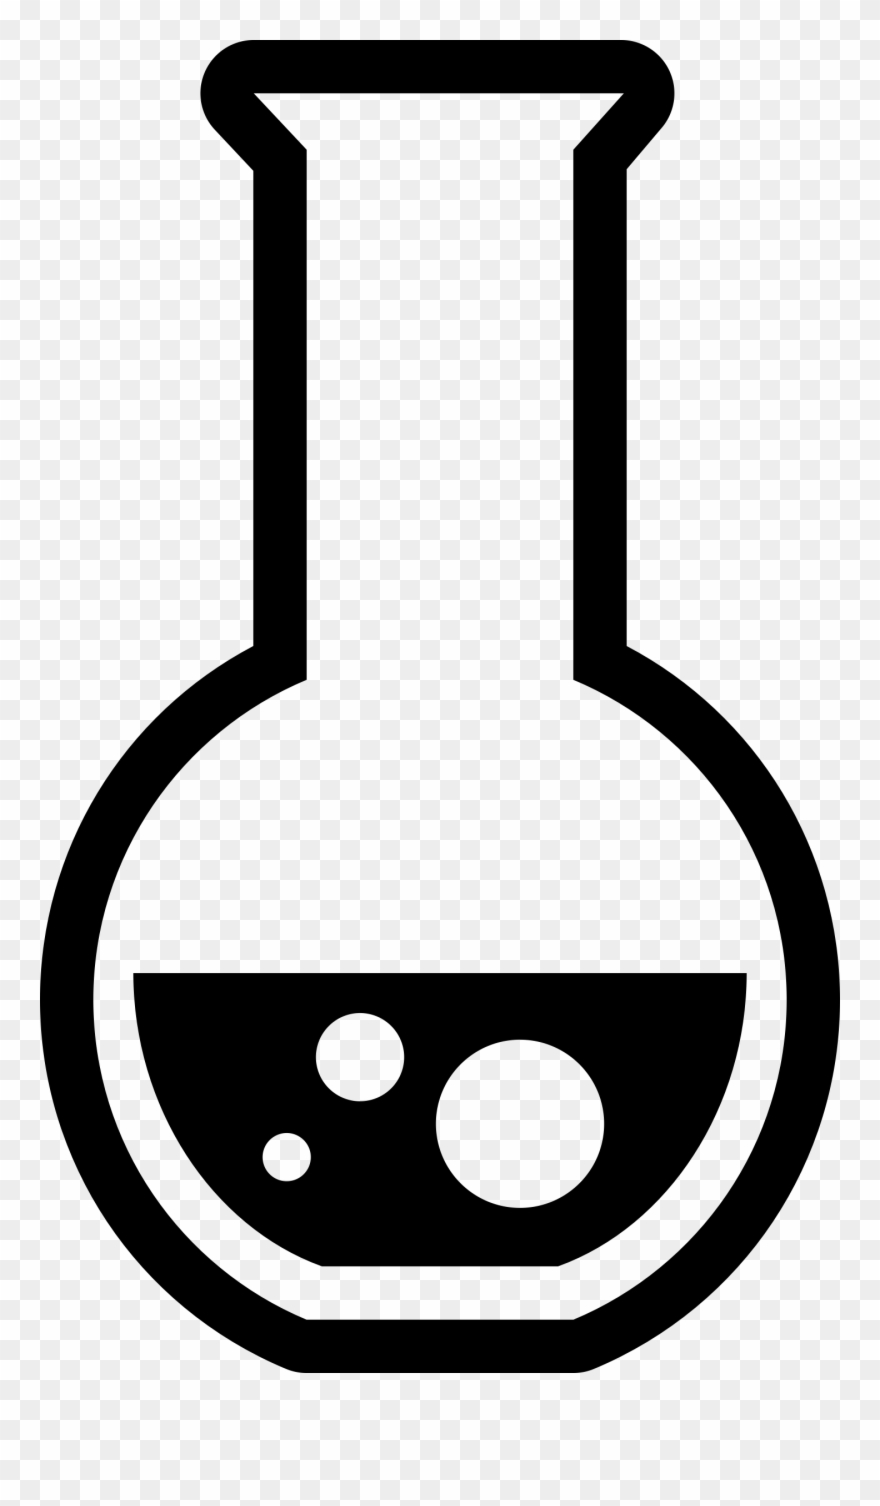 This Png File Is About Outline , Icon , Science , Chemical.